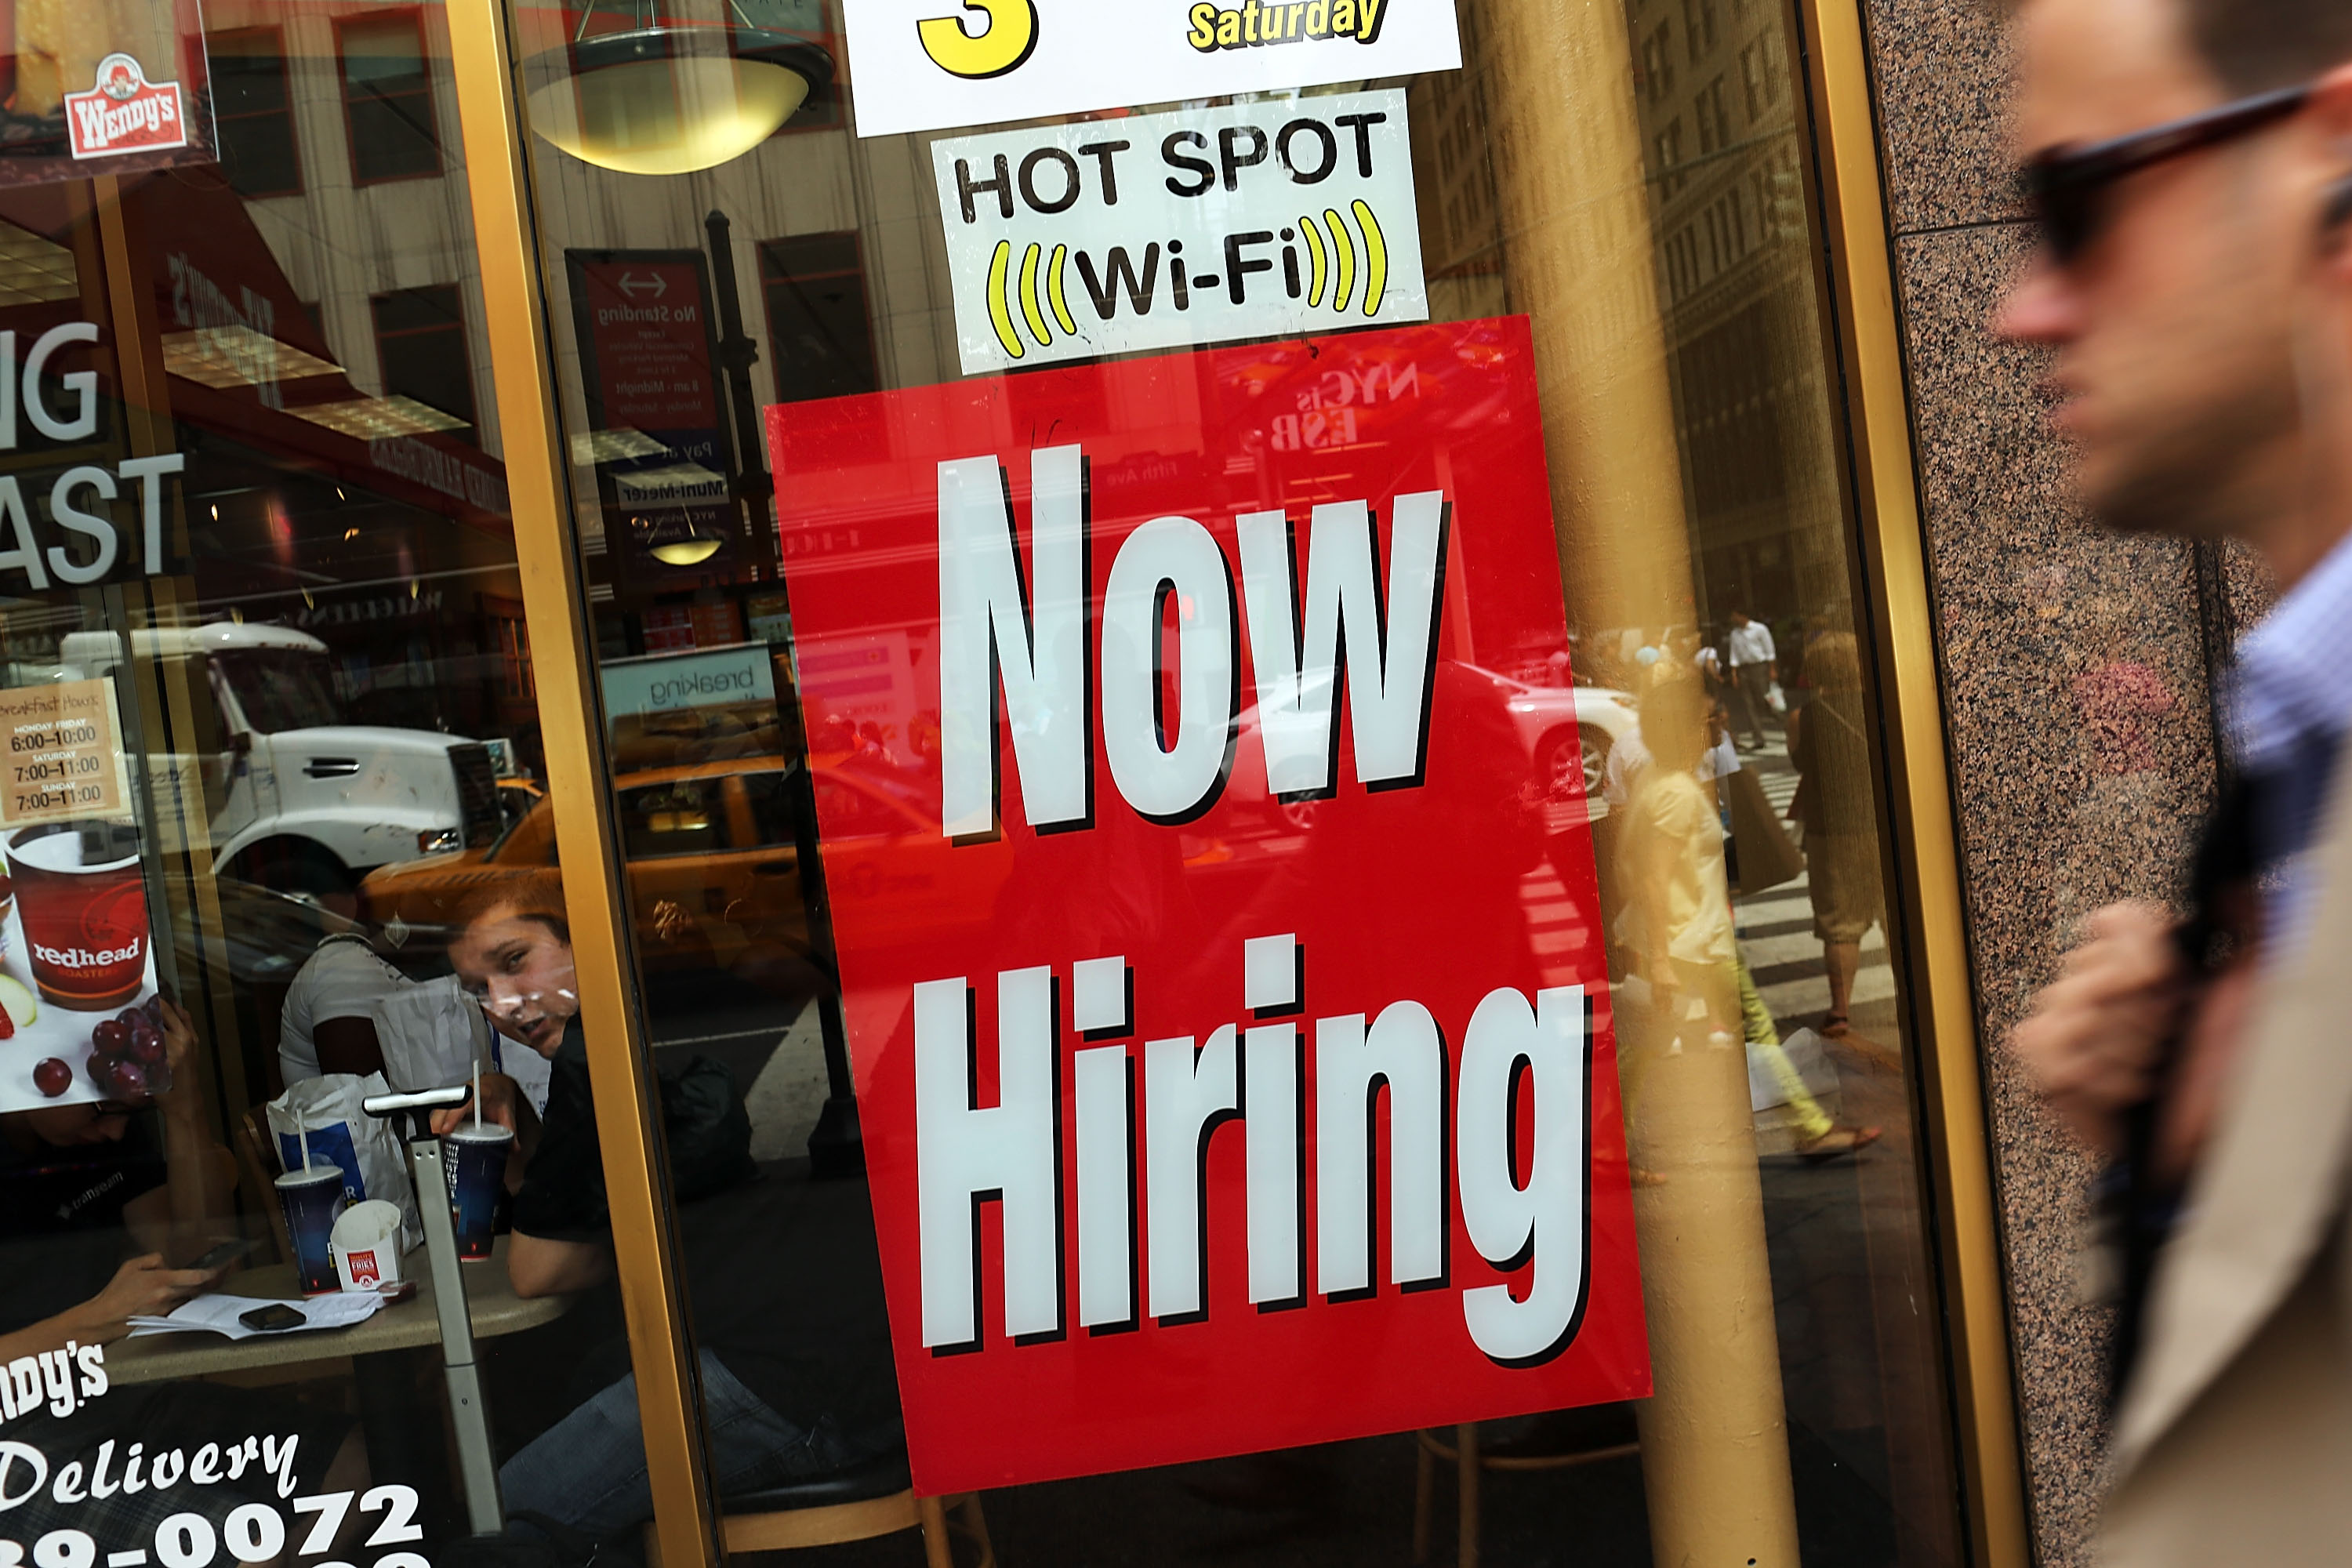 A "now hiring" sign is viewed in the window of a fast food restaurant on August 7, 2012 in New York City. (Spencer Platt&mdash;Getty Images)